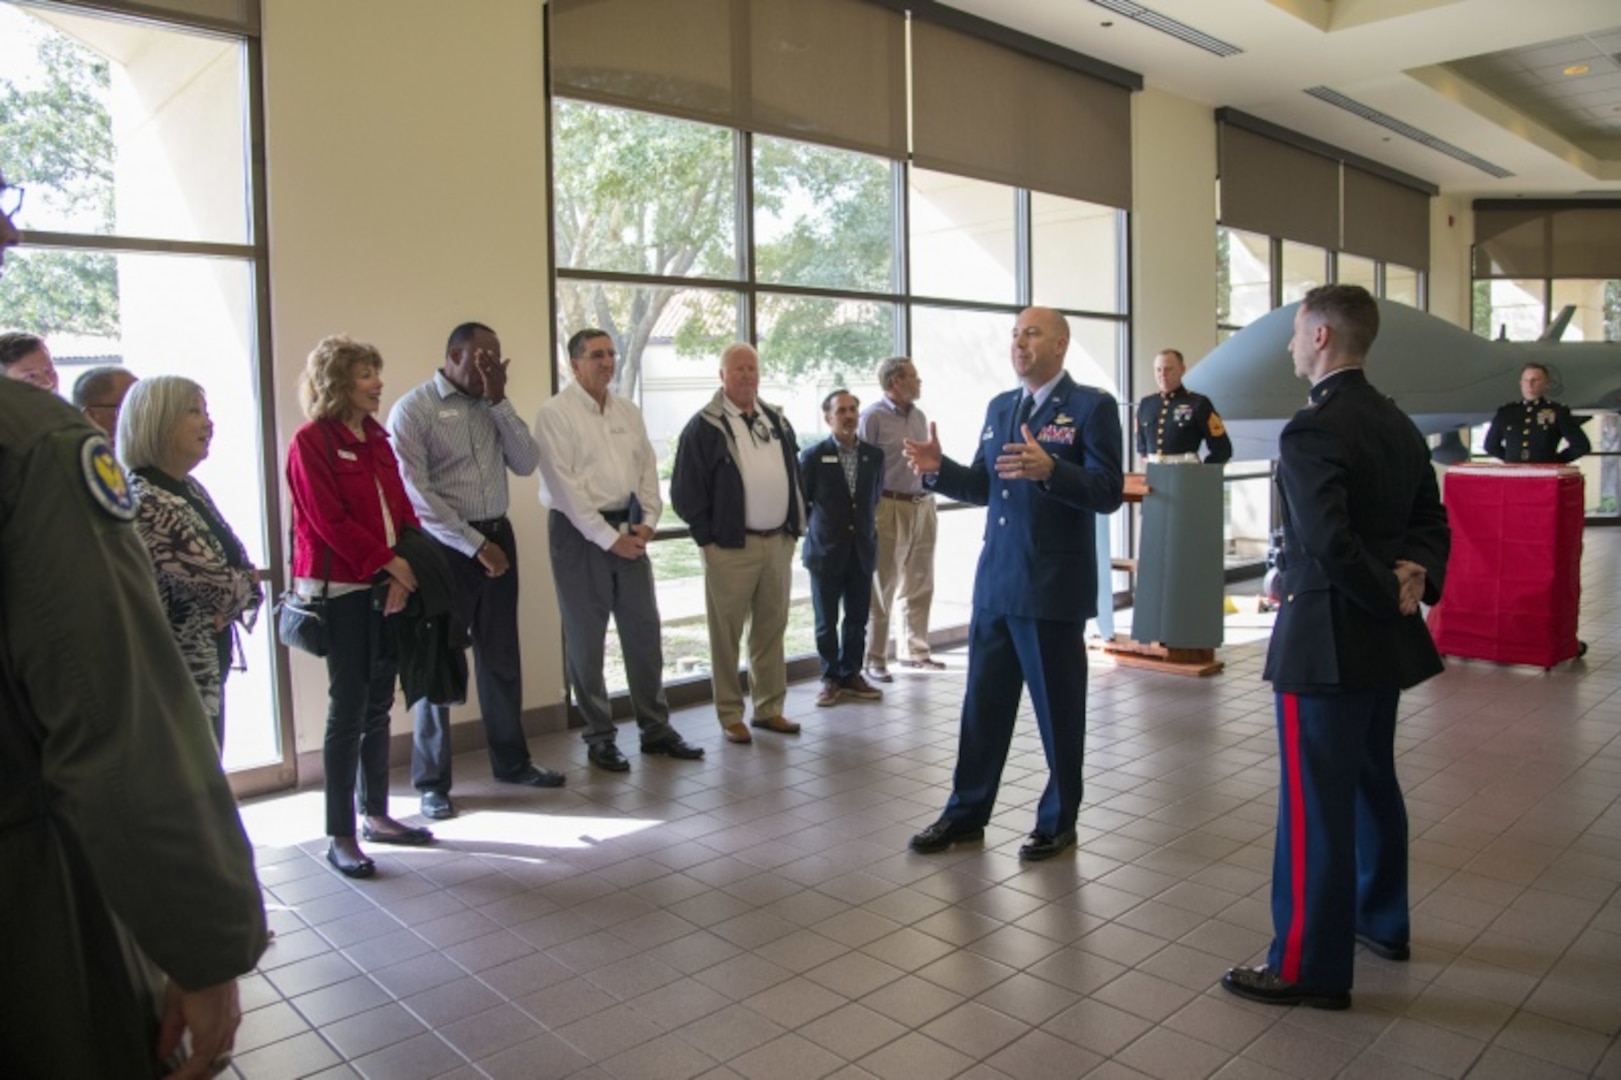 U.S. Air Force Lt. Col. Eric Bissonette welcomes civic leaders to his unit, the 558th Flying Training Squadron, during its observation of the Marine Corps birthday Nov. 6, 2019. During the visit, civic leaders toured missions of 37th Training Wing, 12th Flying Training Wing, 502nd Air Base Wing and Air Force Recruiting Service, all at JBSA locations. The Air Force Civic Leader Program is an Air Staff-level program comprising major command-selected community leaders from a wide variety of industries and sectors, including banking and economic development, construction, manufacturing, education, healthcare, science and technology.